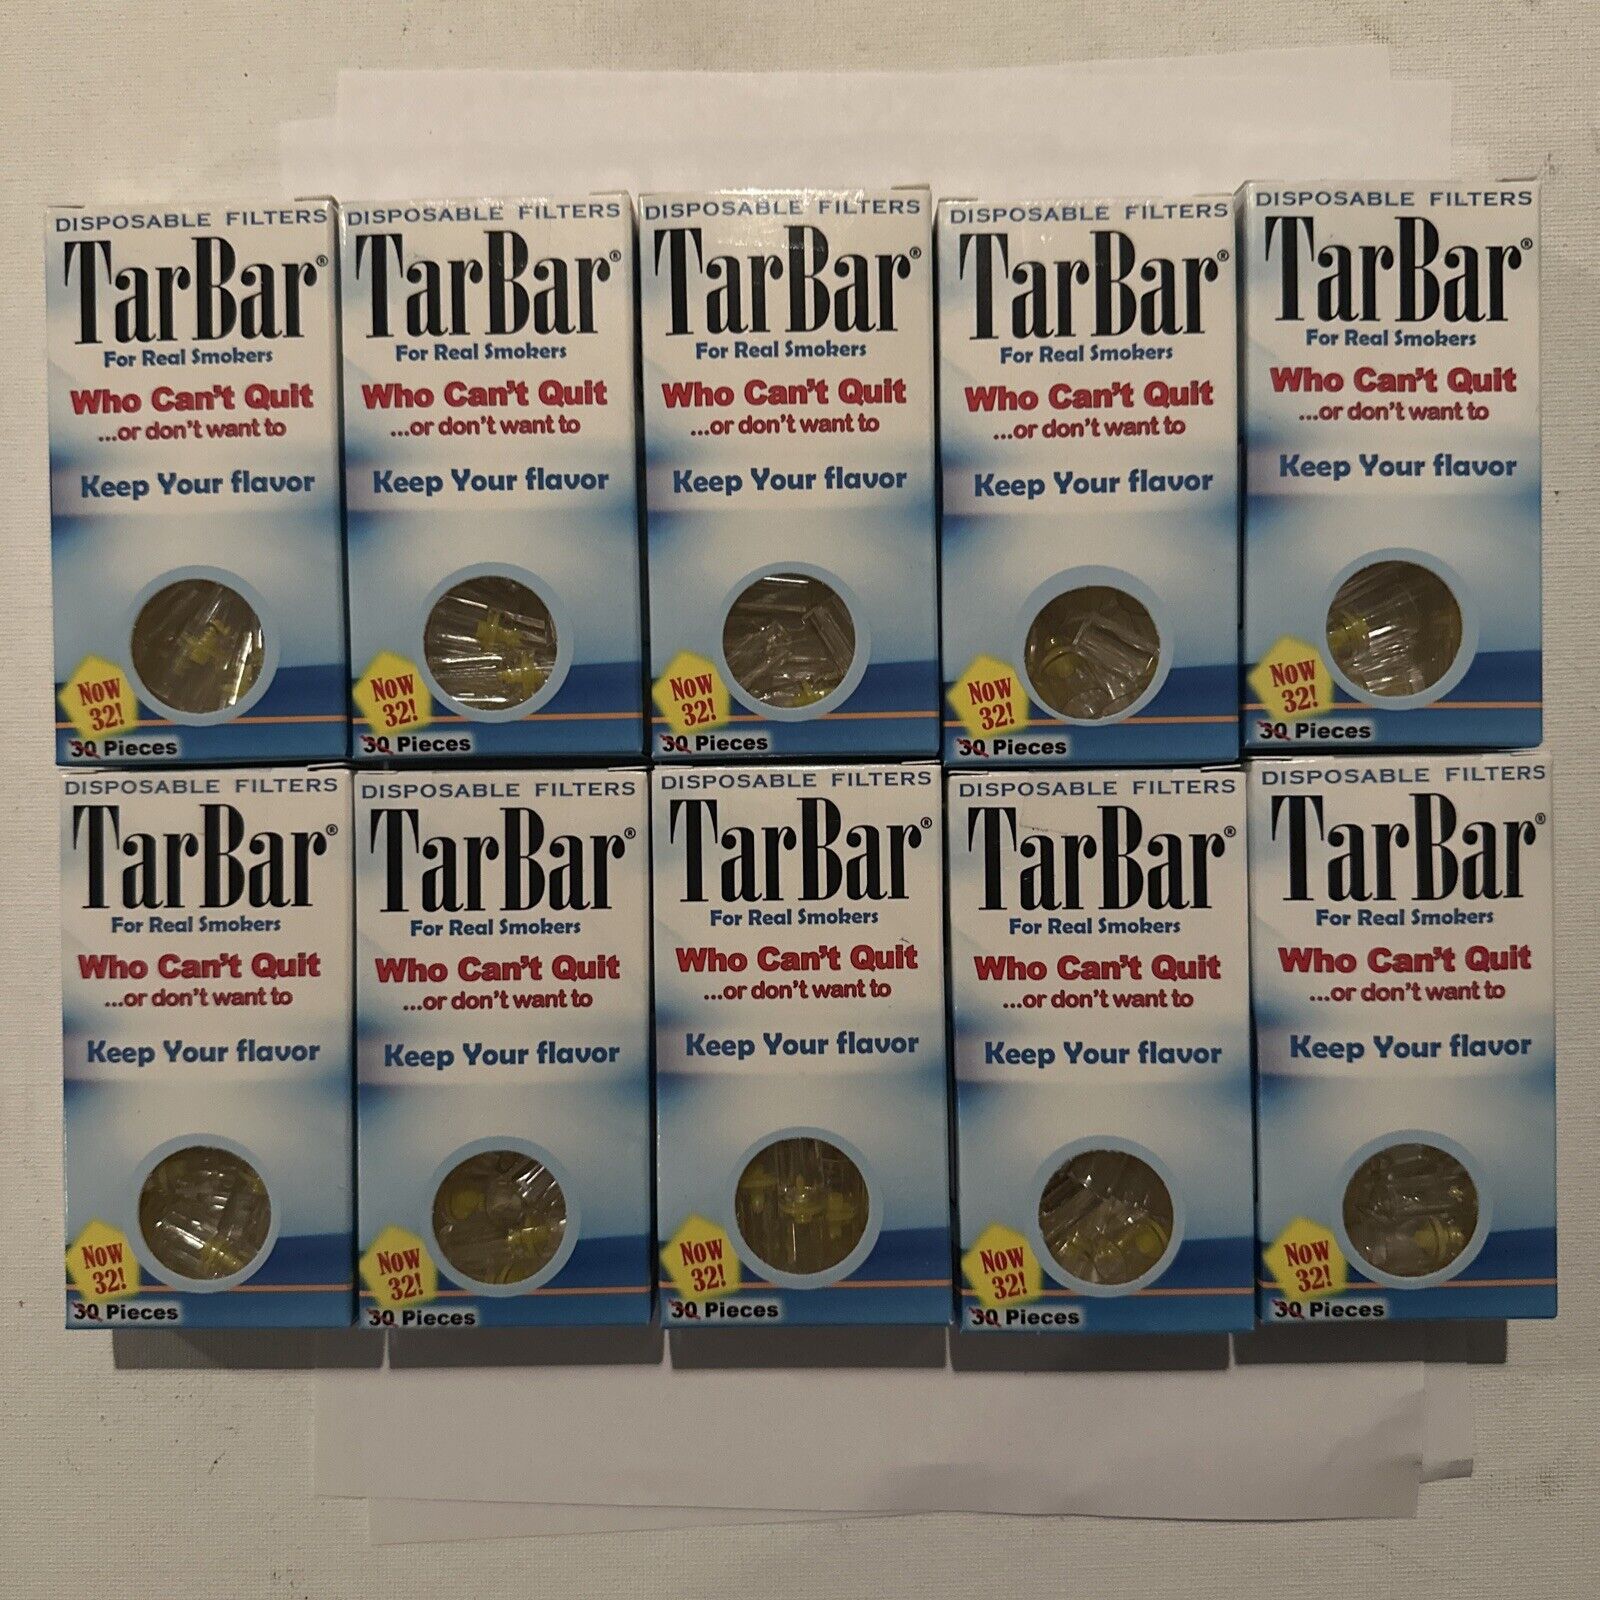 TarBar Cigarette Filters Disposable - 10 BOXES 320 Filters Total Reduced Price